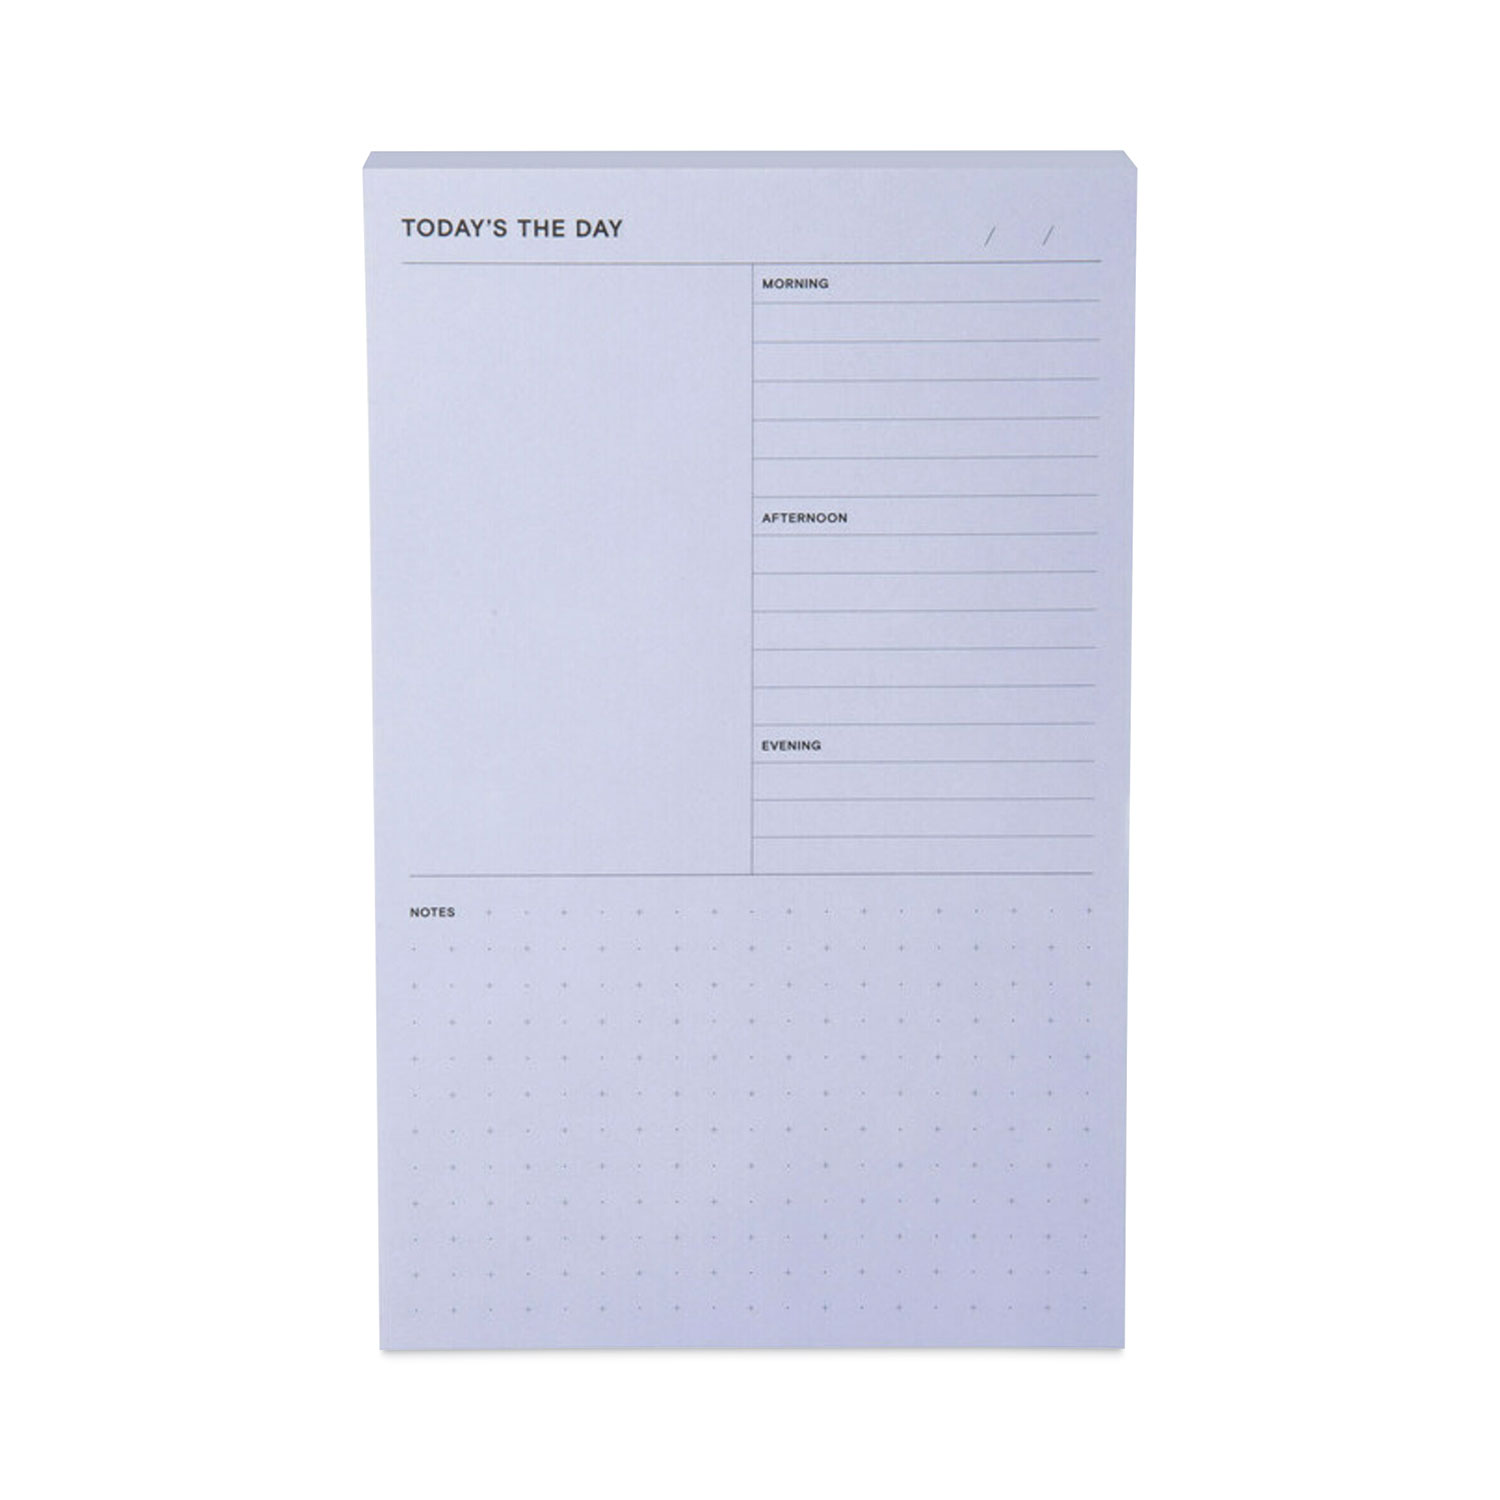 Adhesive Daily Planner Sticky-Note Pads, Daily Planner Format, 4.9 x 7.7,  Blue, 100 Sheets/Pad - Reliable Paper